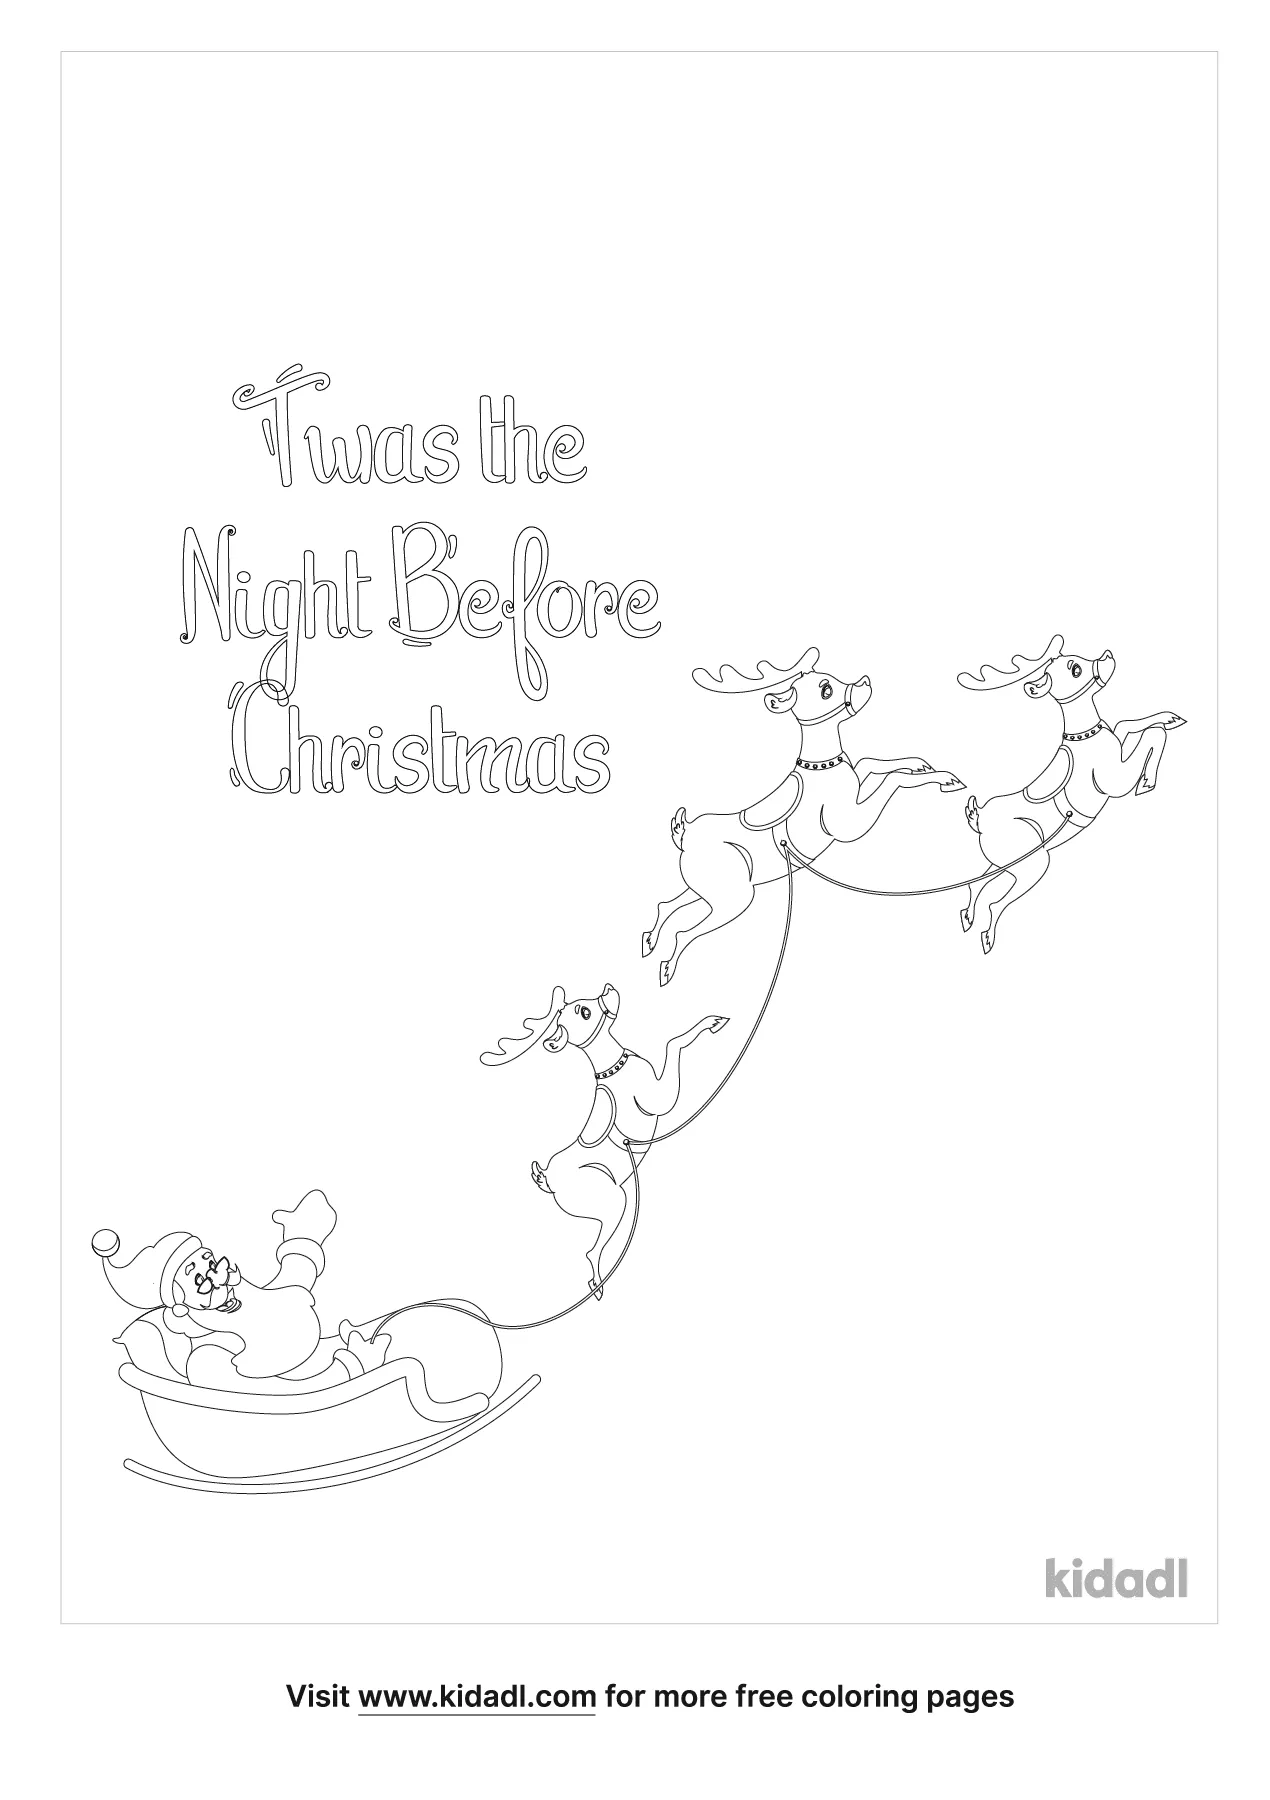 Free twas the night before christmas coloring page coloring page printables